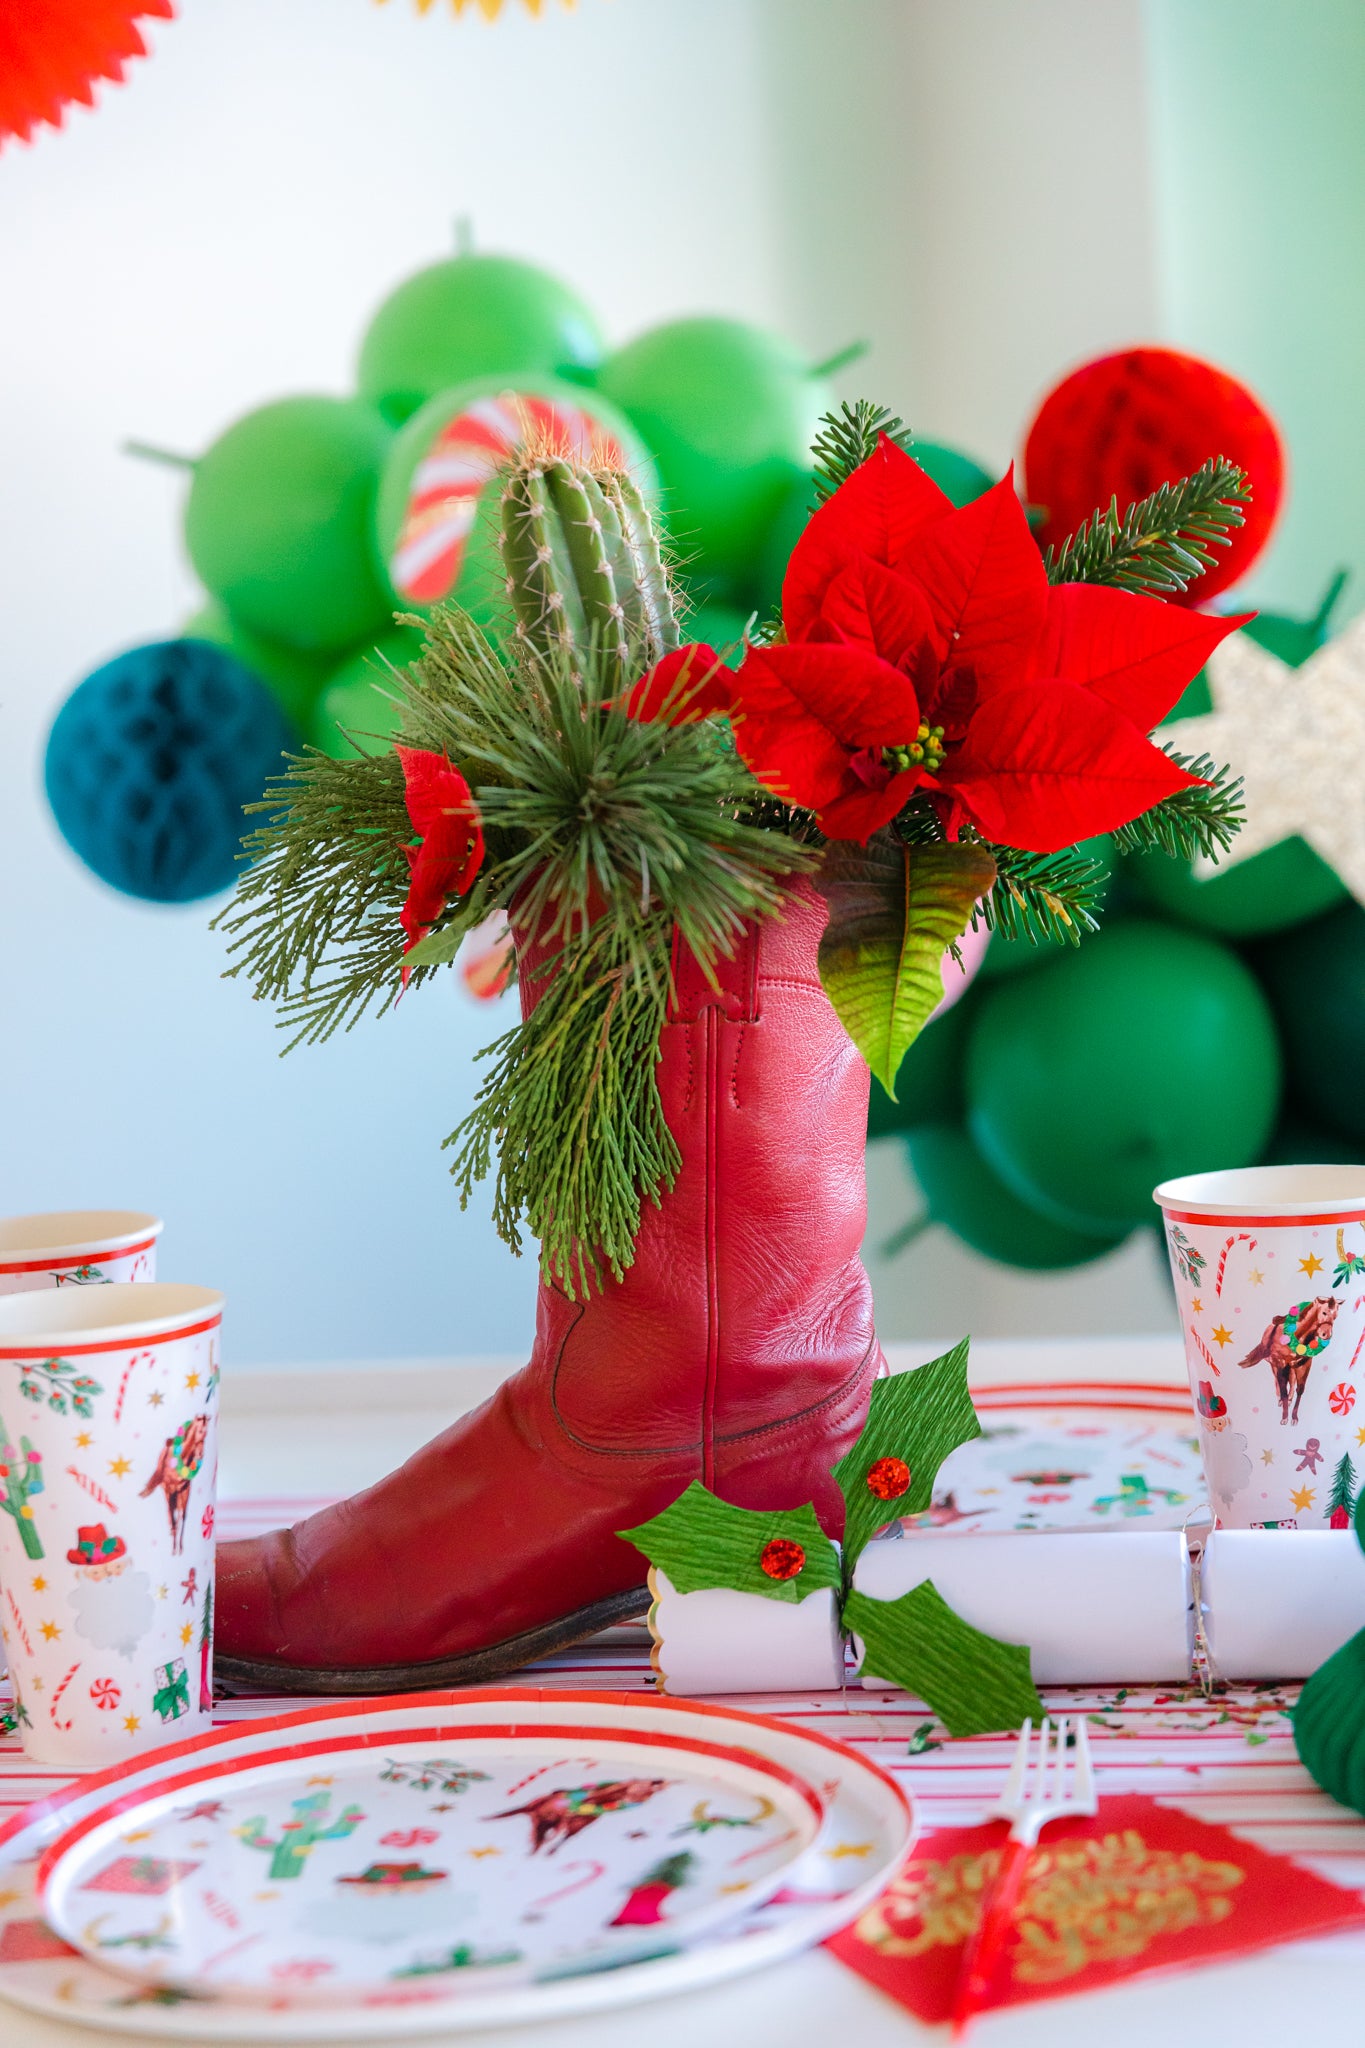 Cowboy Christmas centerpiece ideas using flowers and cowboy boots.